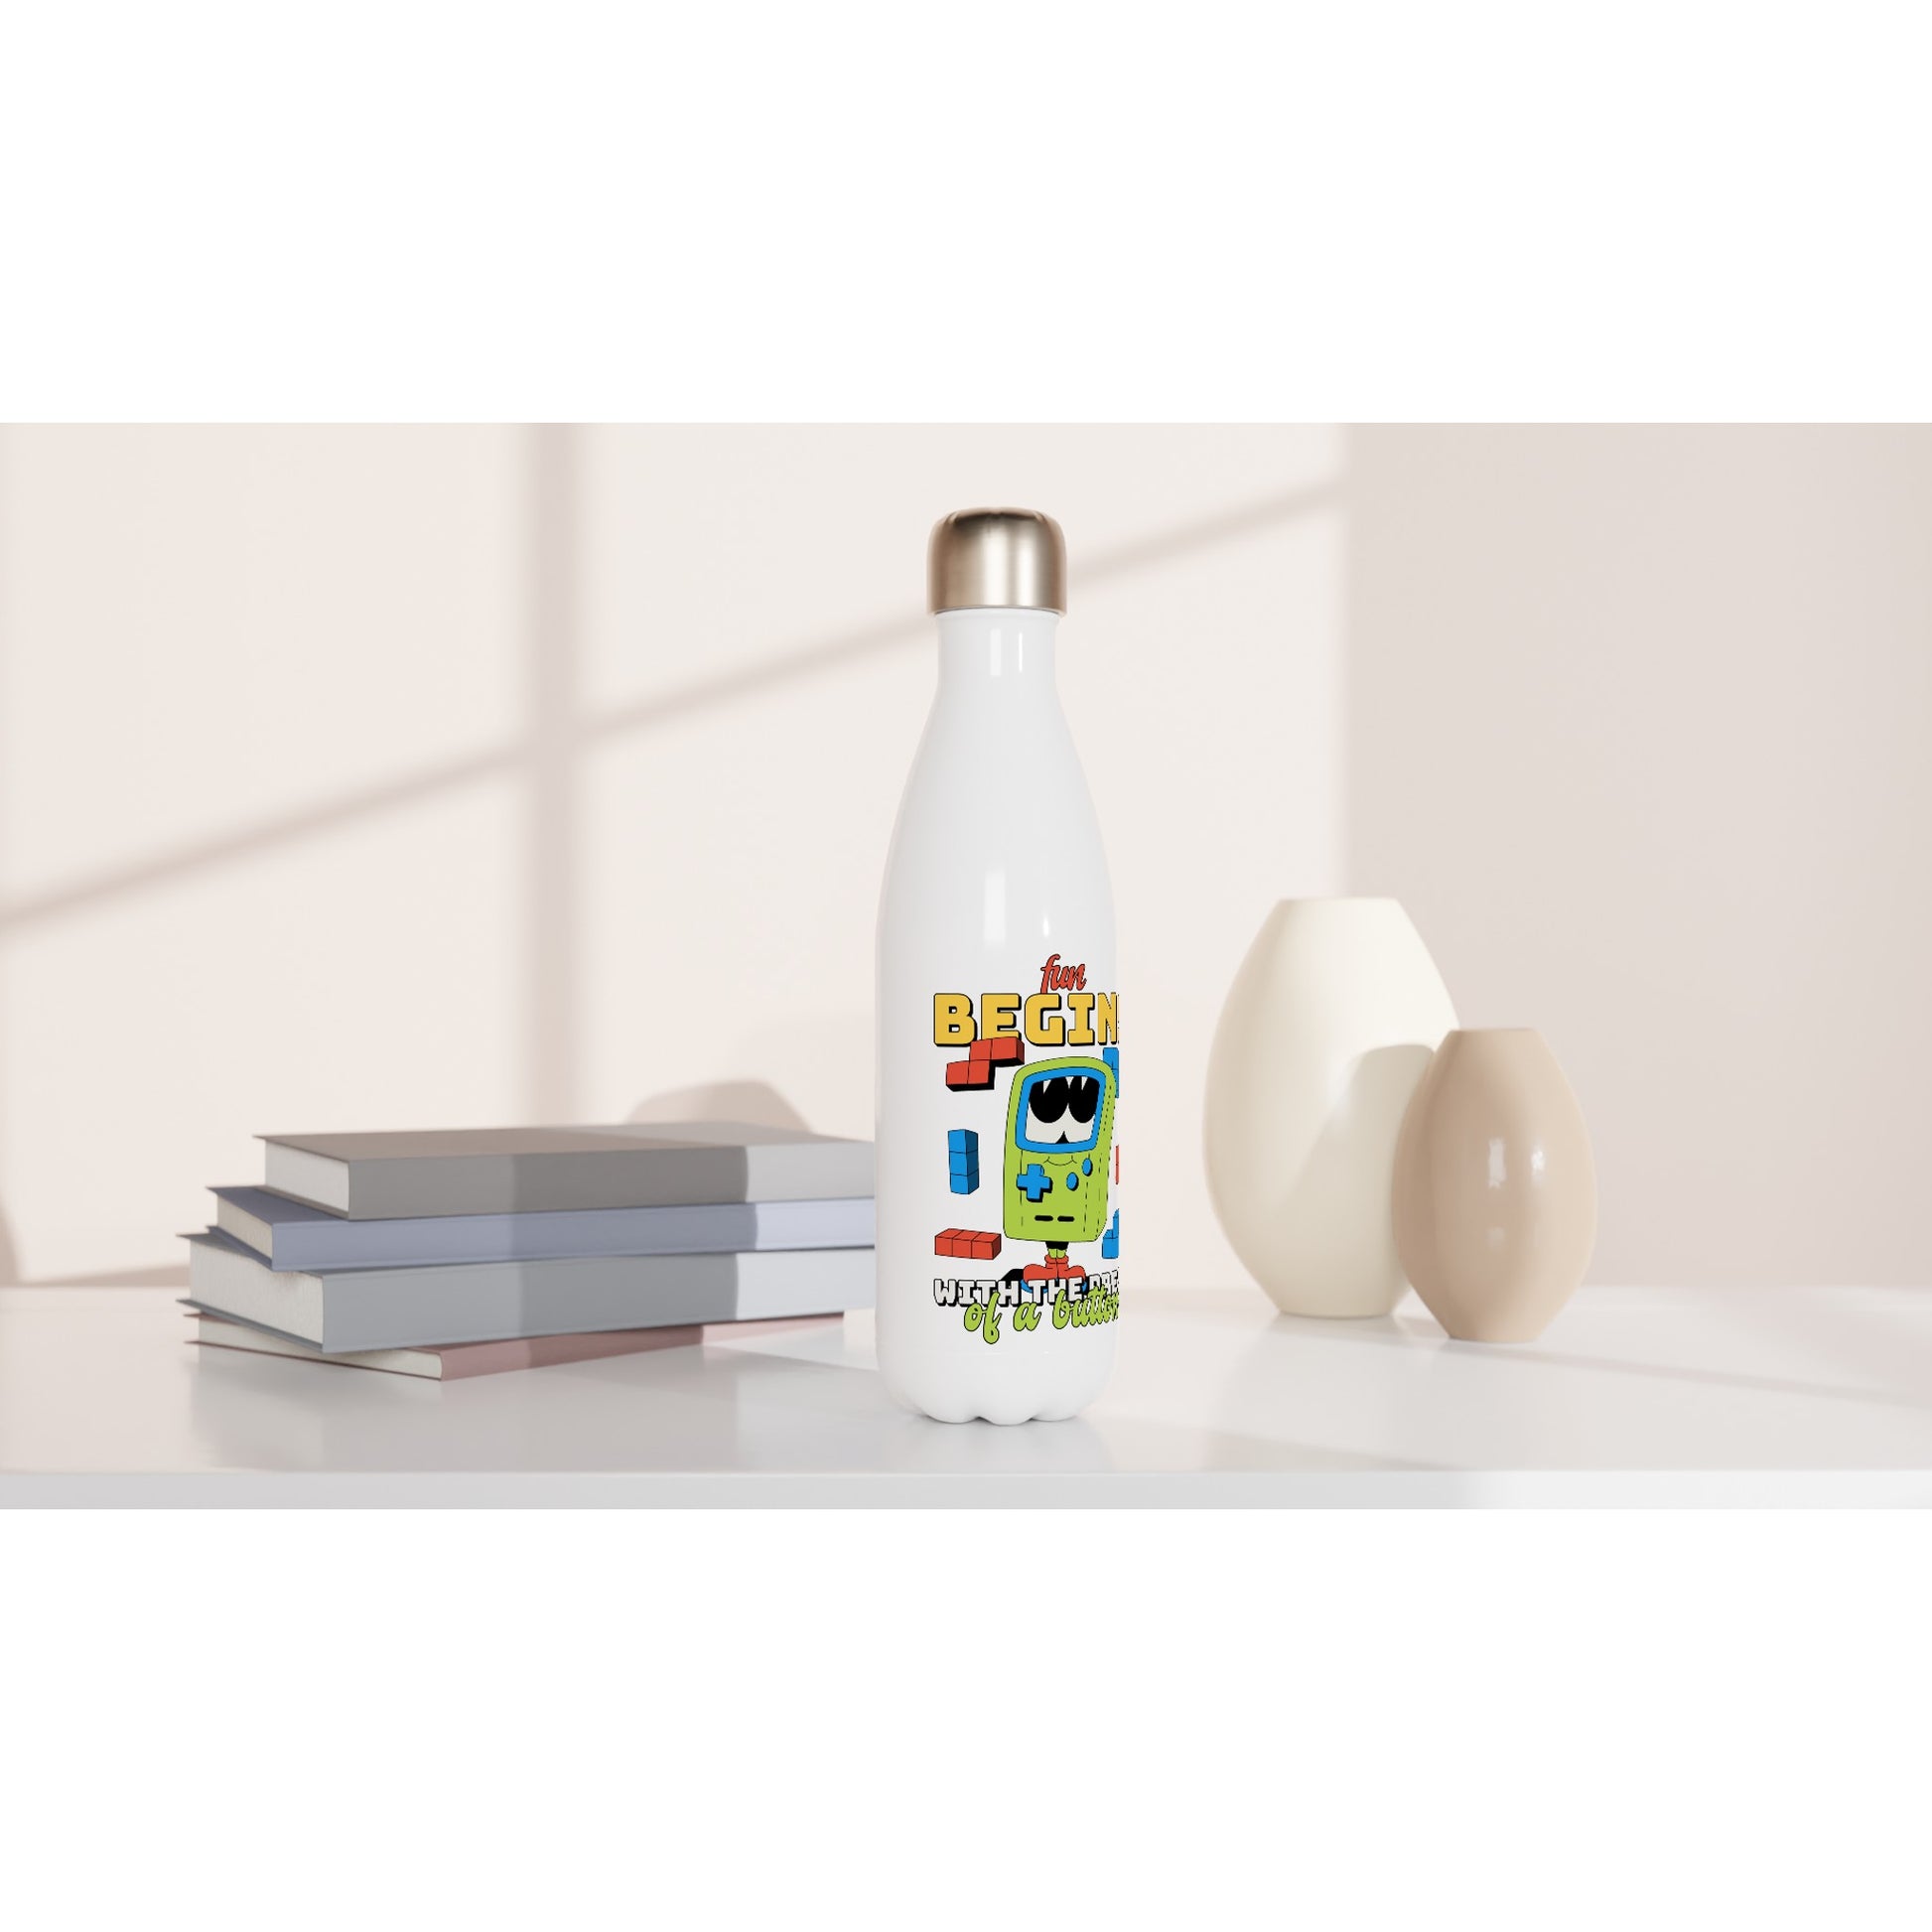 Fun Begins With The Press Of A Button - White 17oz Stainless Steel Water Bottle White Water Bottle Games